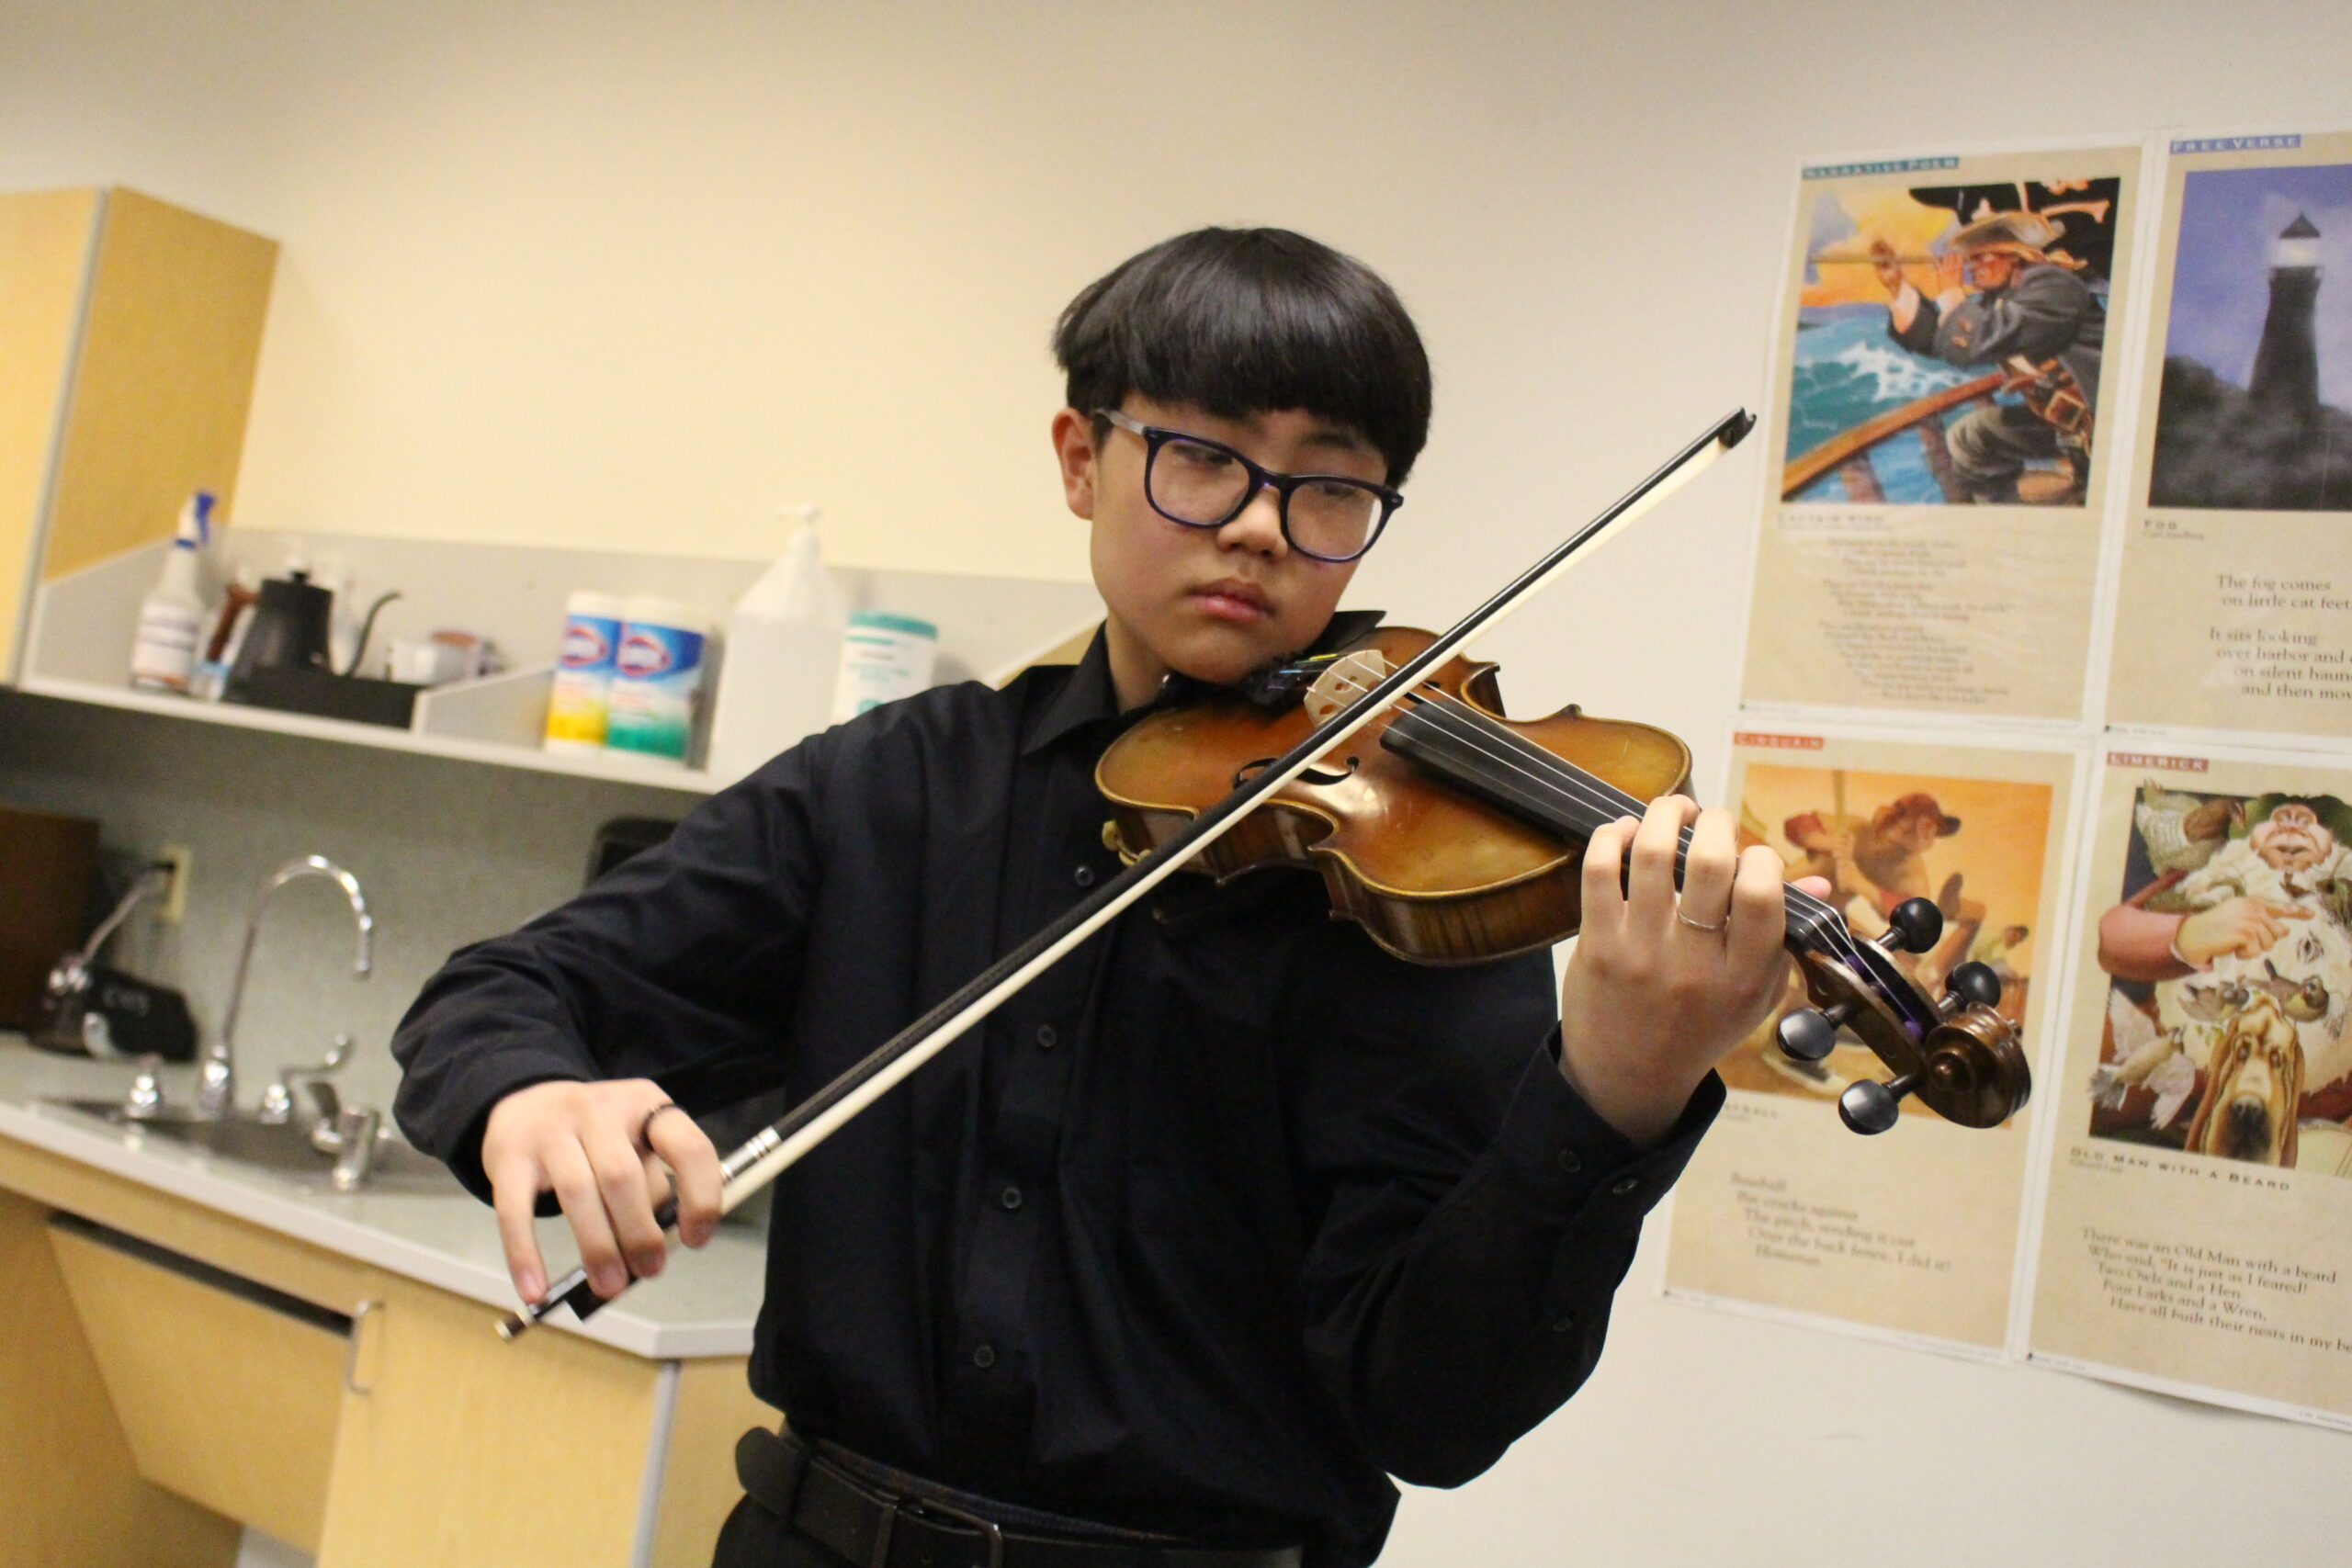 A middle school musician plays violin.